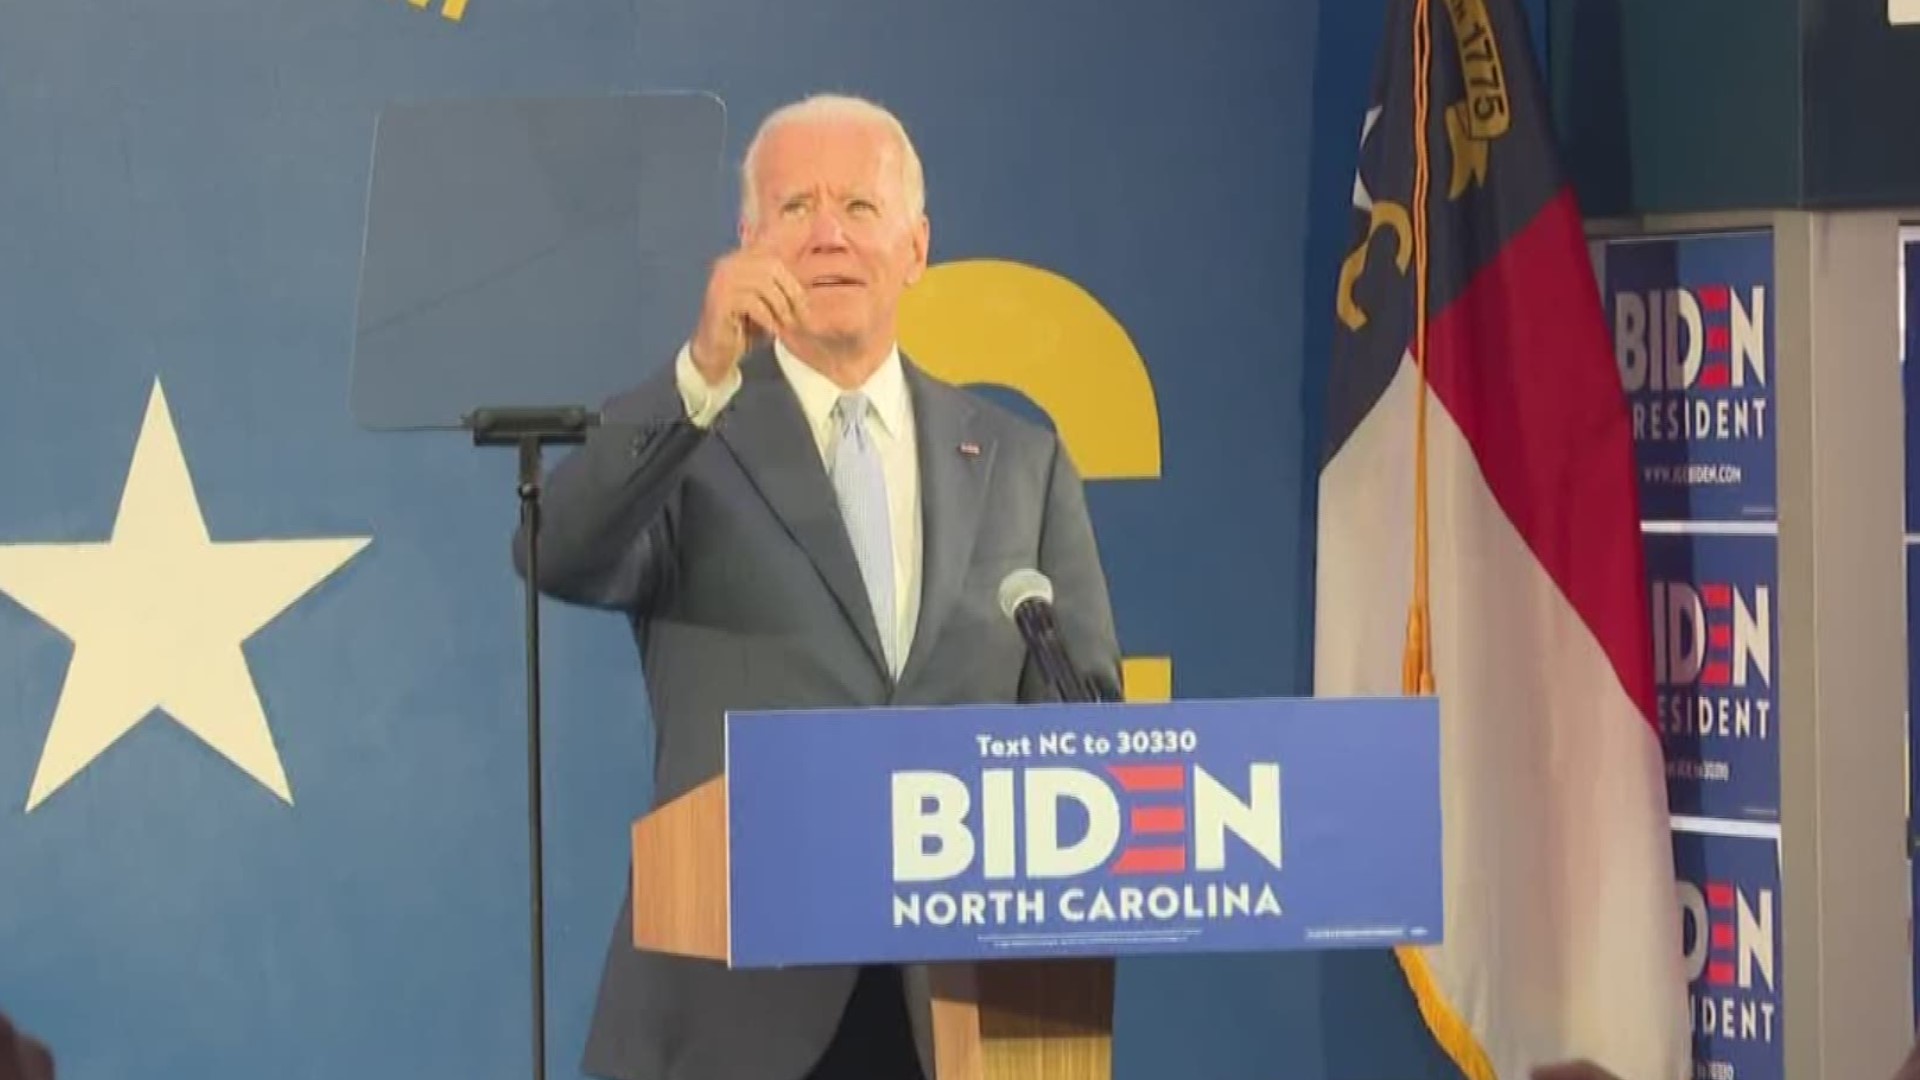 The former Vice President stopped in Durham to campaign, just a day after the ISIS leader was killed in a military raid